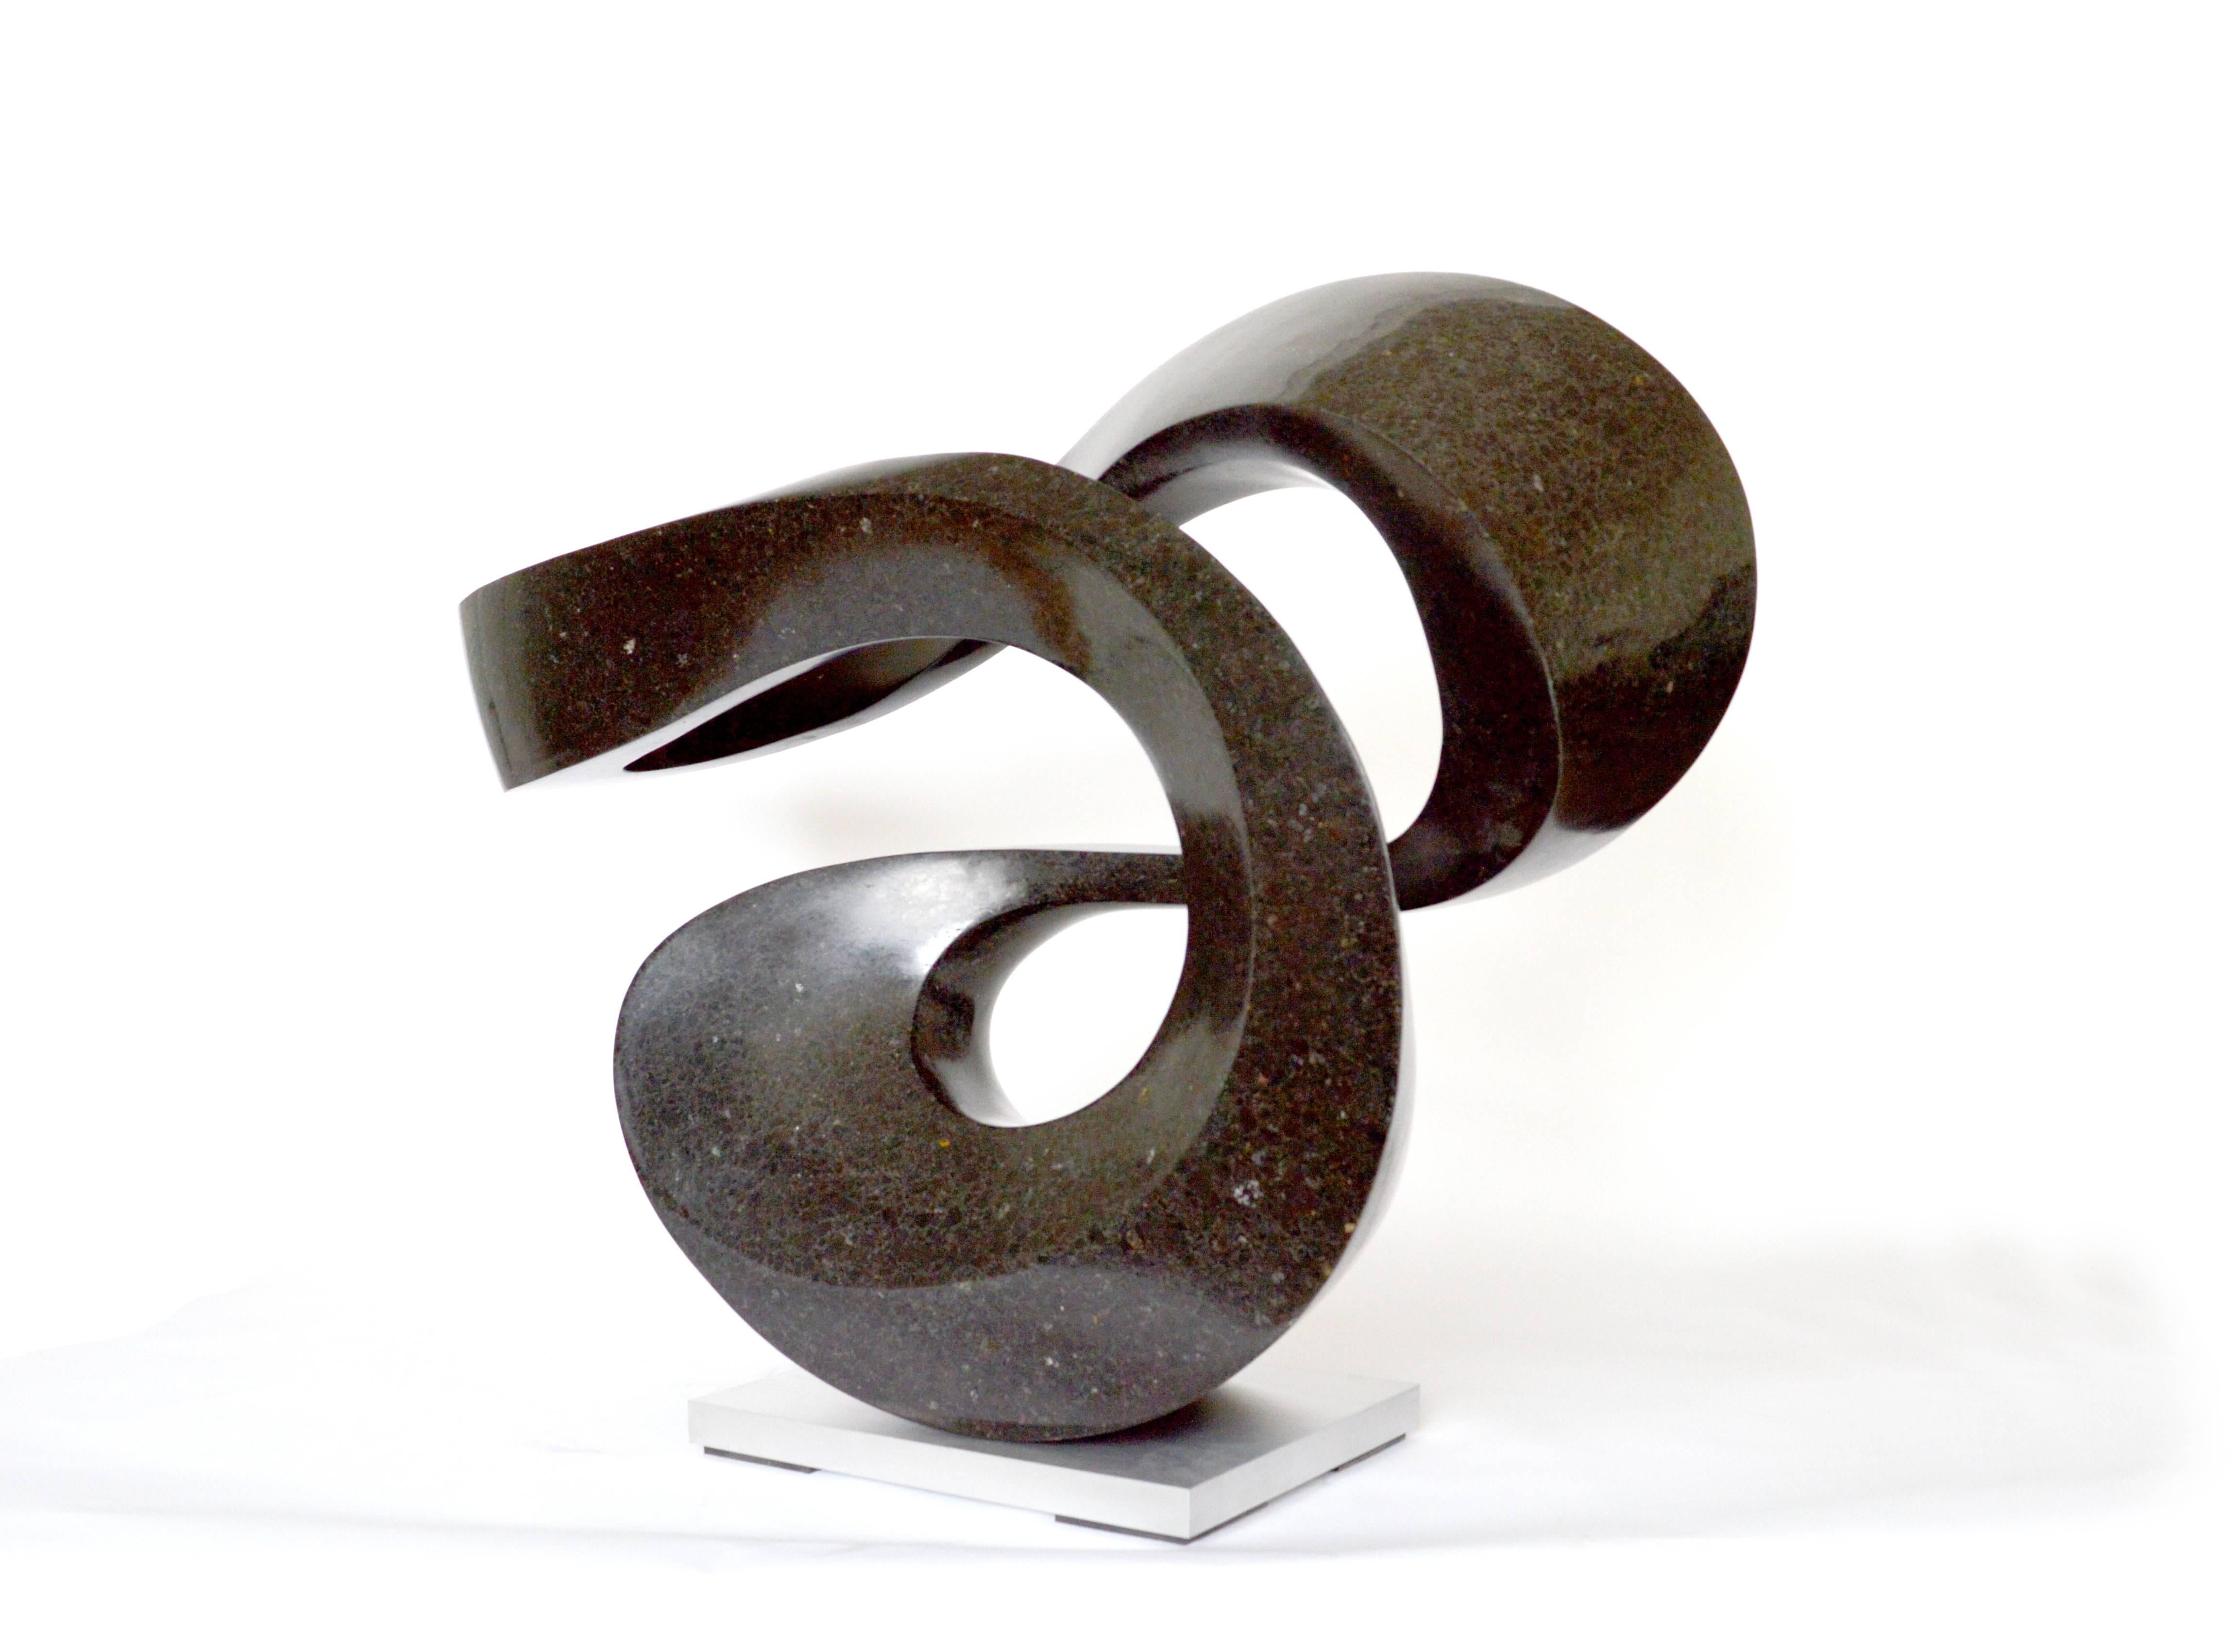 Zephyr Minor 5/50 - smooth, black, granite, indoor/outdoor, abstract sculpture - Gray Abstract Sculpture by Jeremy Guy